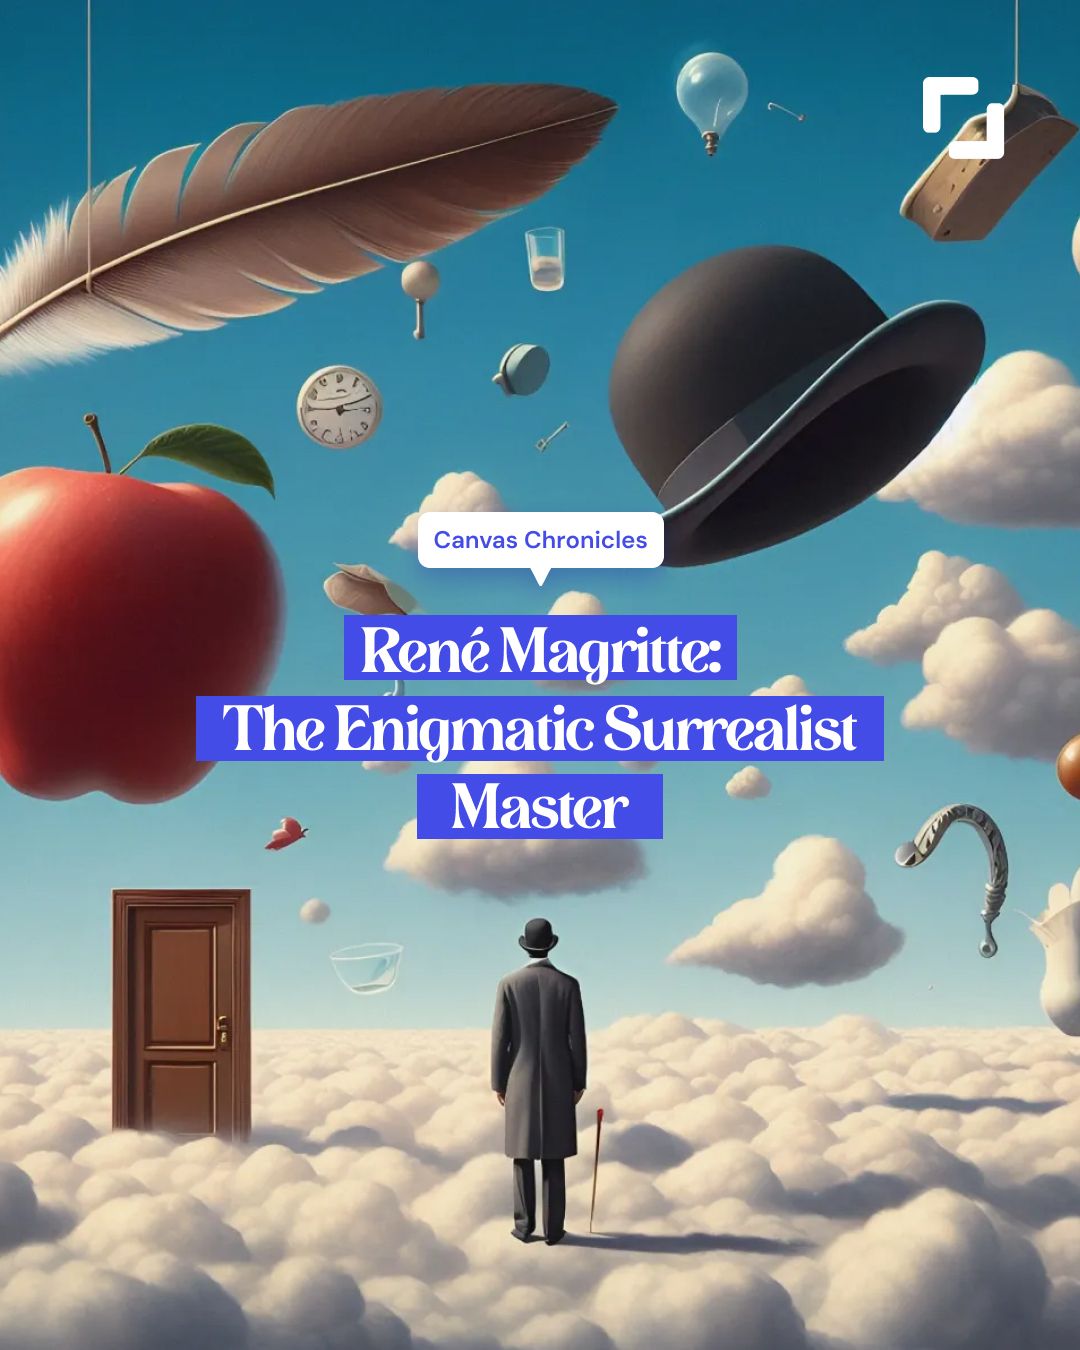 René Magritte: The Enigmatic Surrealist Master